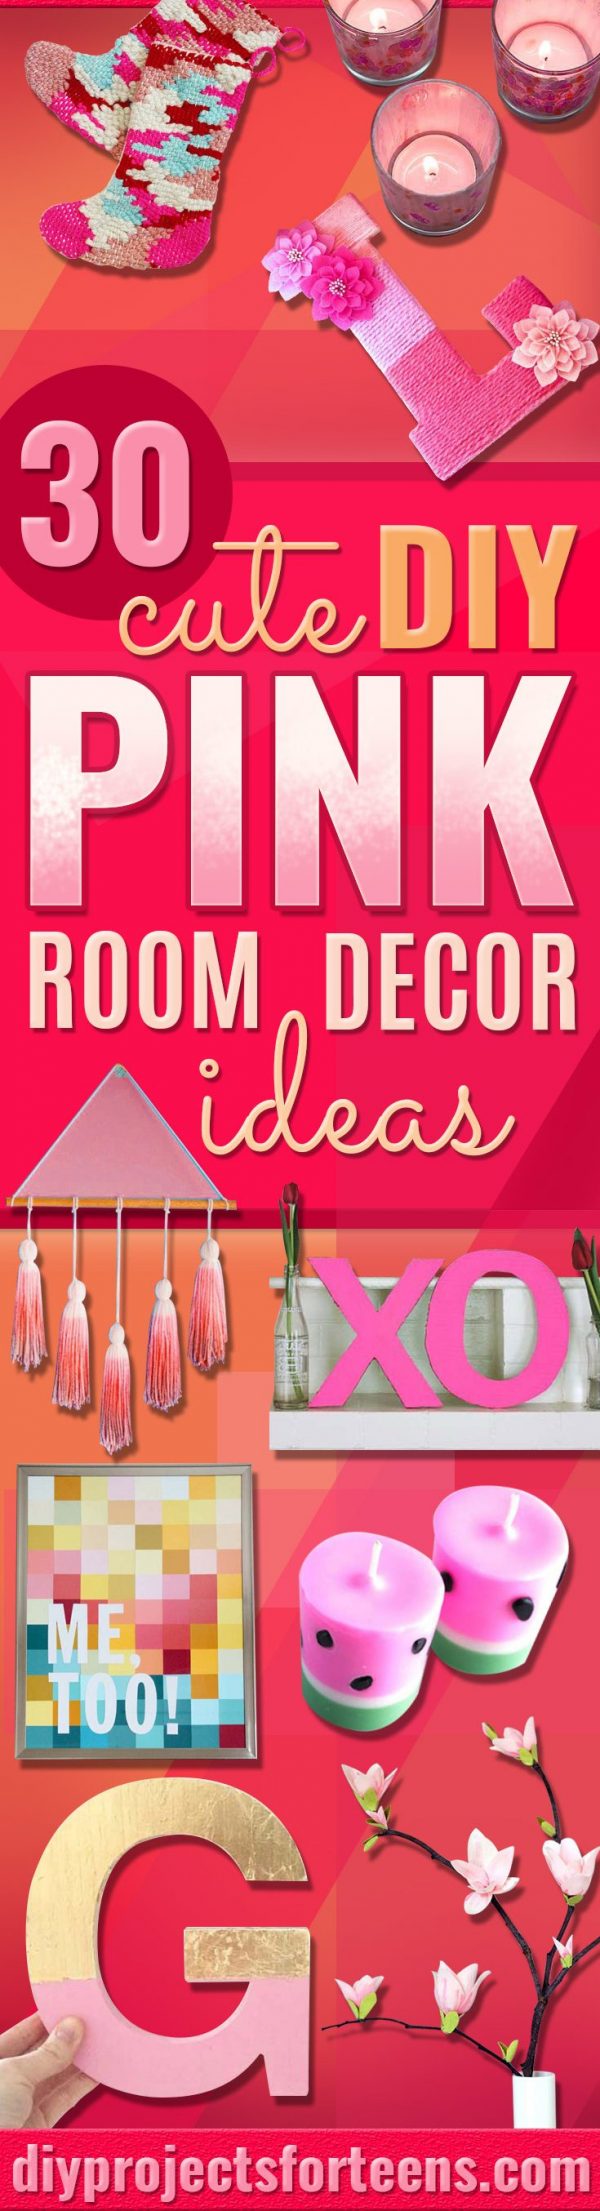 31 Pink DIY Room Decor Ideas - Cool Pink Bedroom Crafts and Projects for Teens, Girls, Teenagers and Adults - Best Wall Art Ideas, Room Decorating Project Tutorials, Rugs, Lighting and Lamps, Bed Decor and Pillows #teencrafts #roomdecor #pink